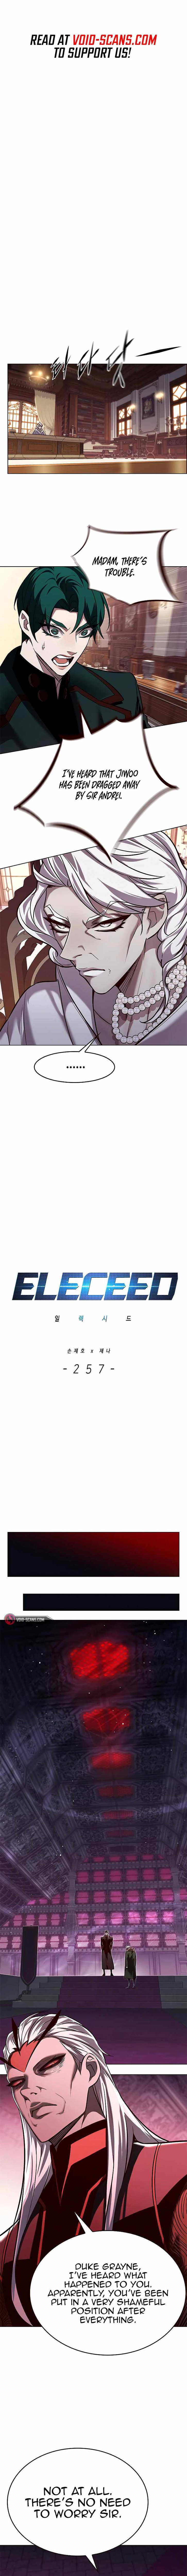 Eleceed - Page 2